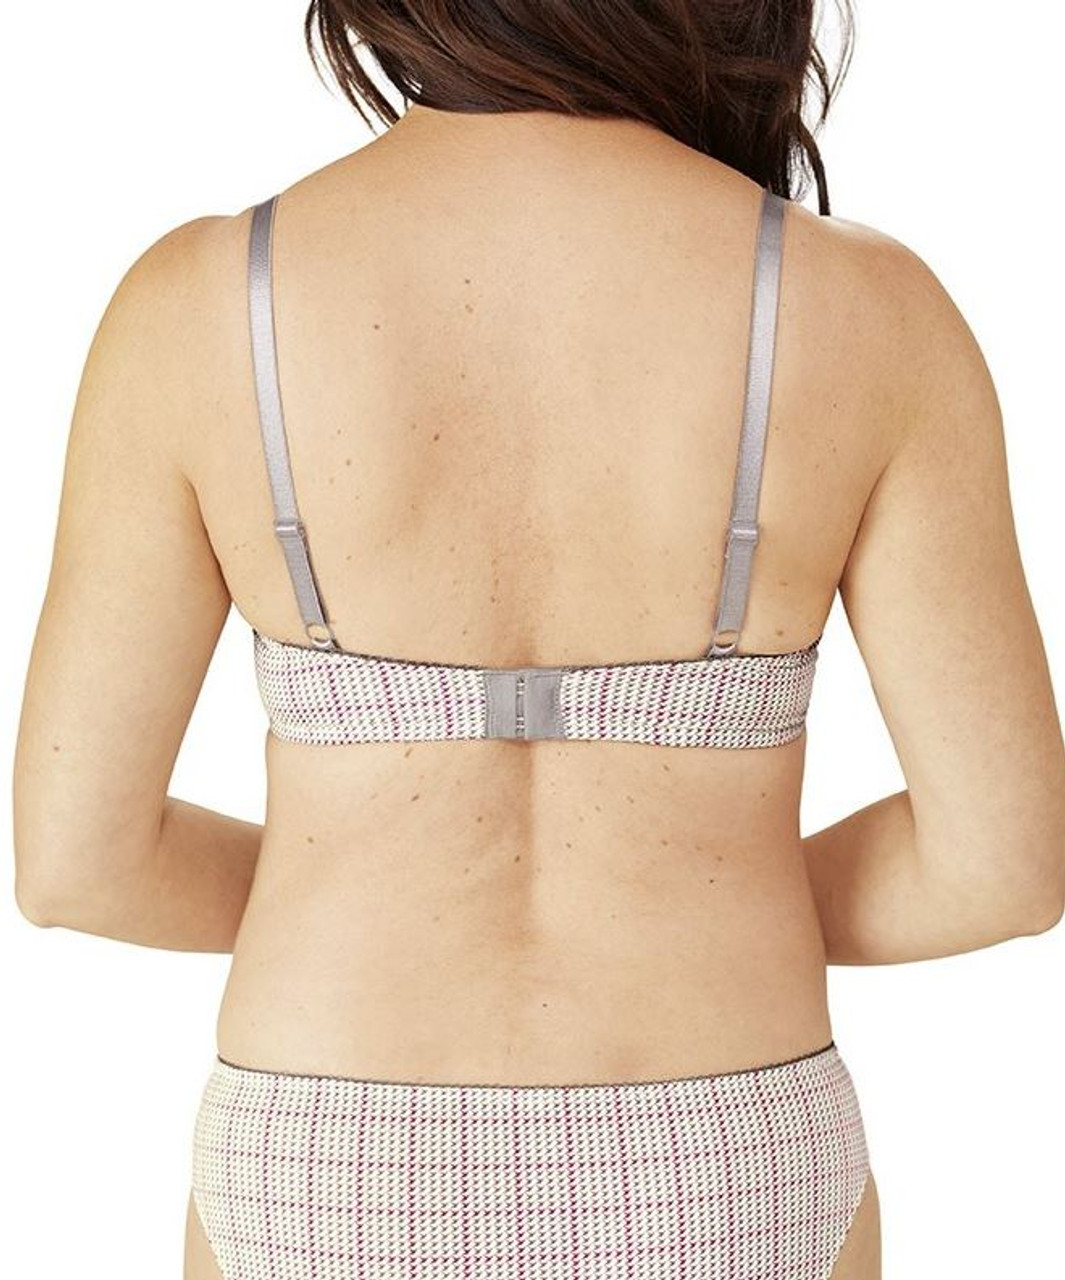 Amoena Breast Forms, Bras & Panties - Mastectomy Products